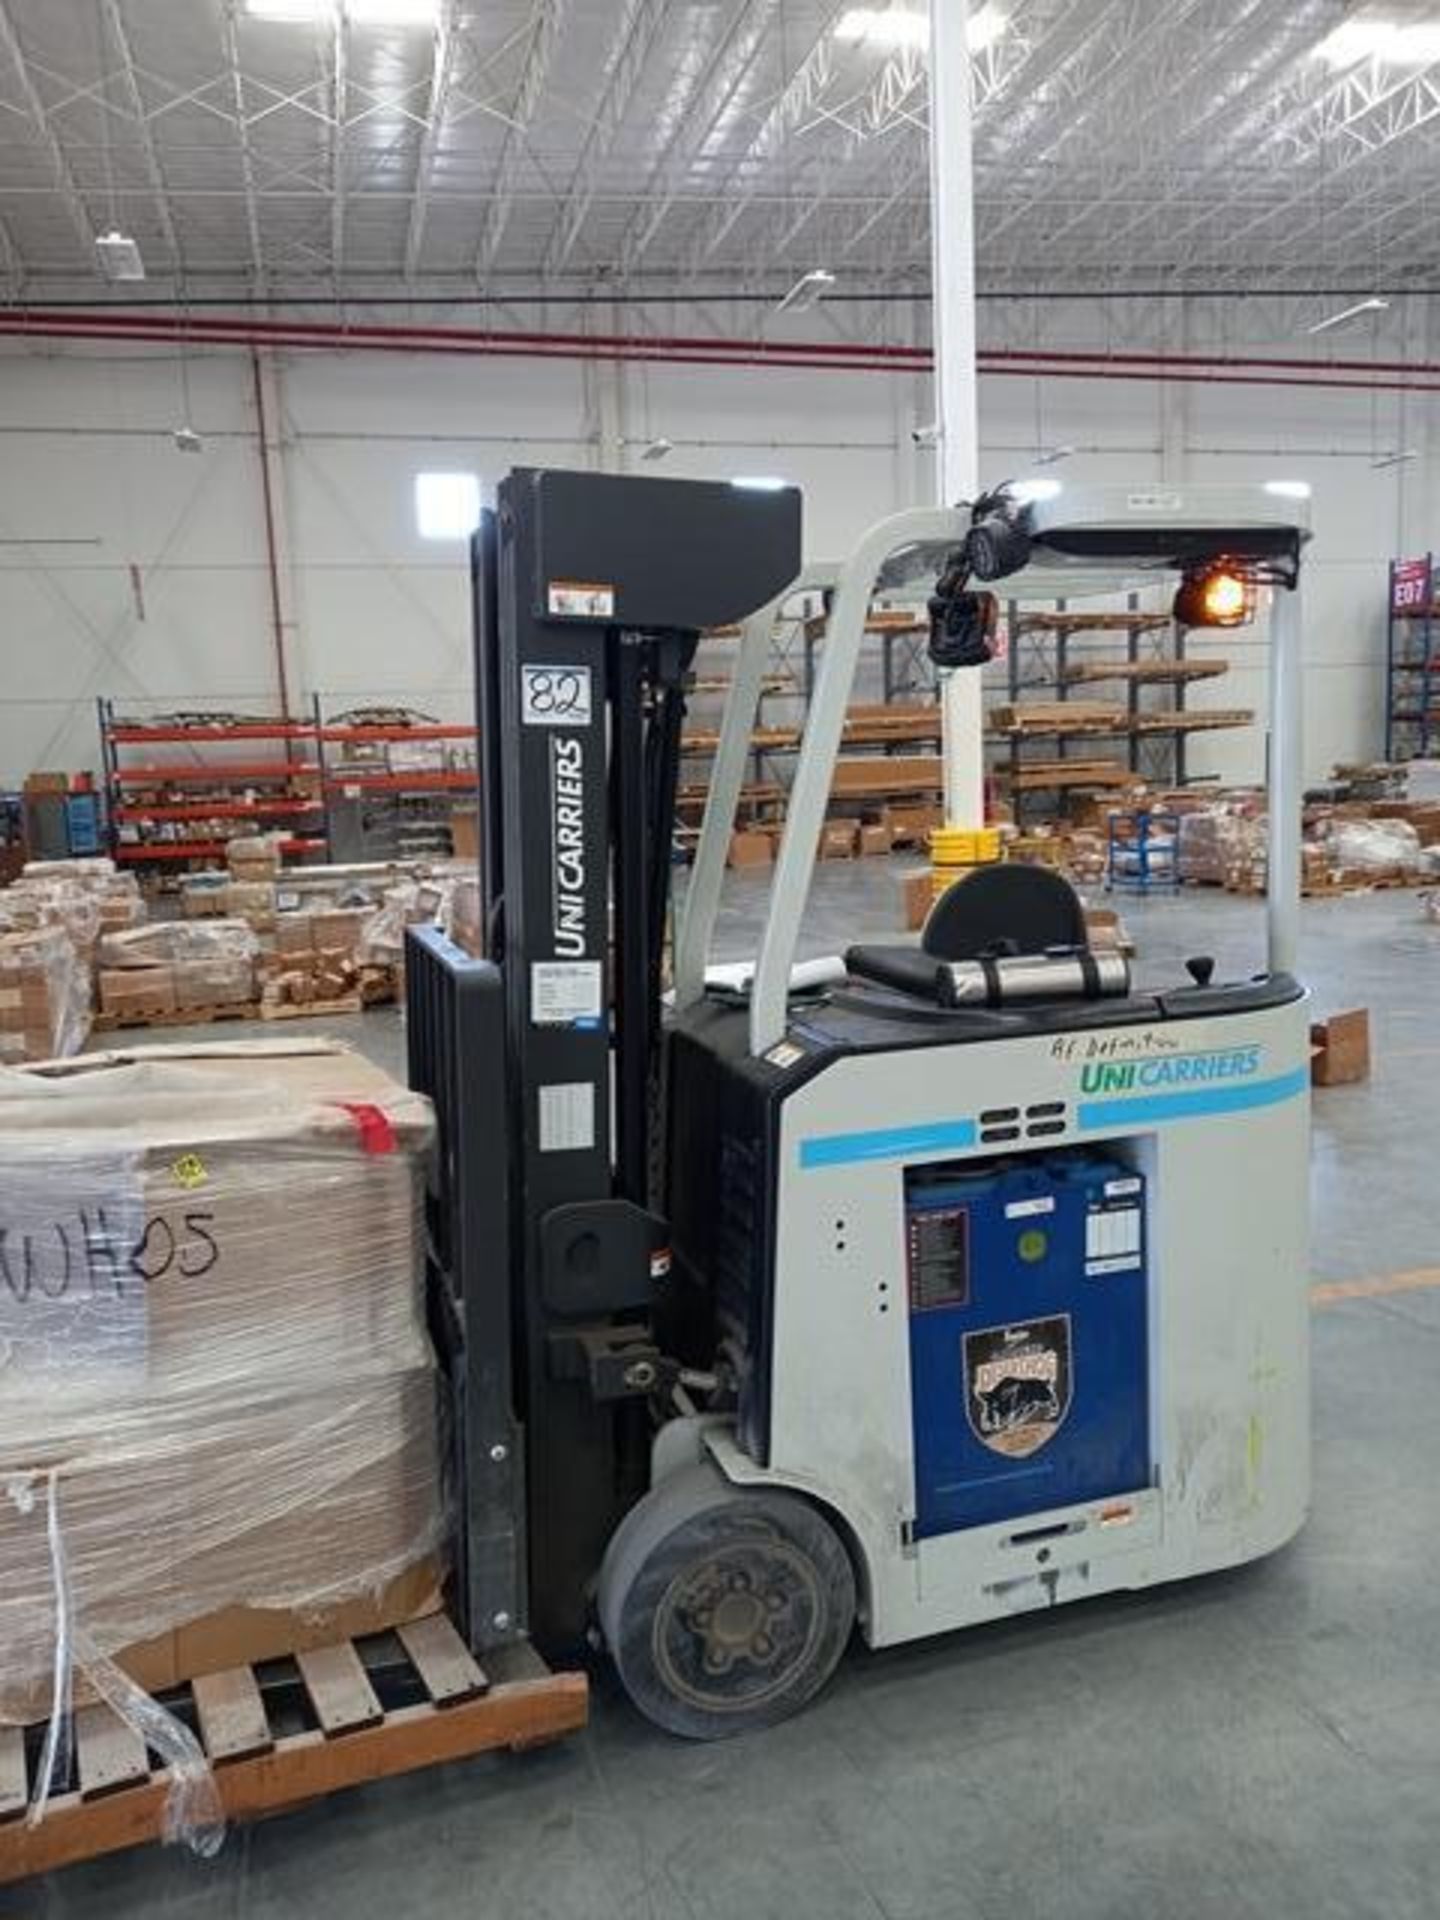 Unicarriers 1S1L20NV Stand Up Electric Forklift, Side Shift, 2950 lbs. Capacity, 258 in. Reach, S/ - Image 5 of 12